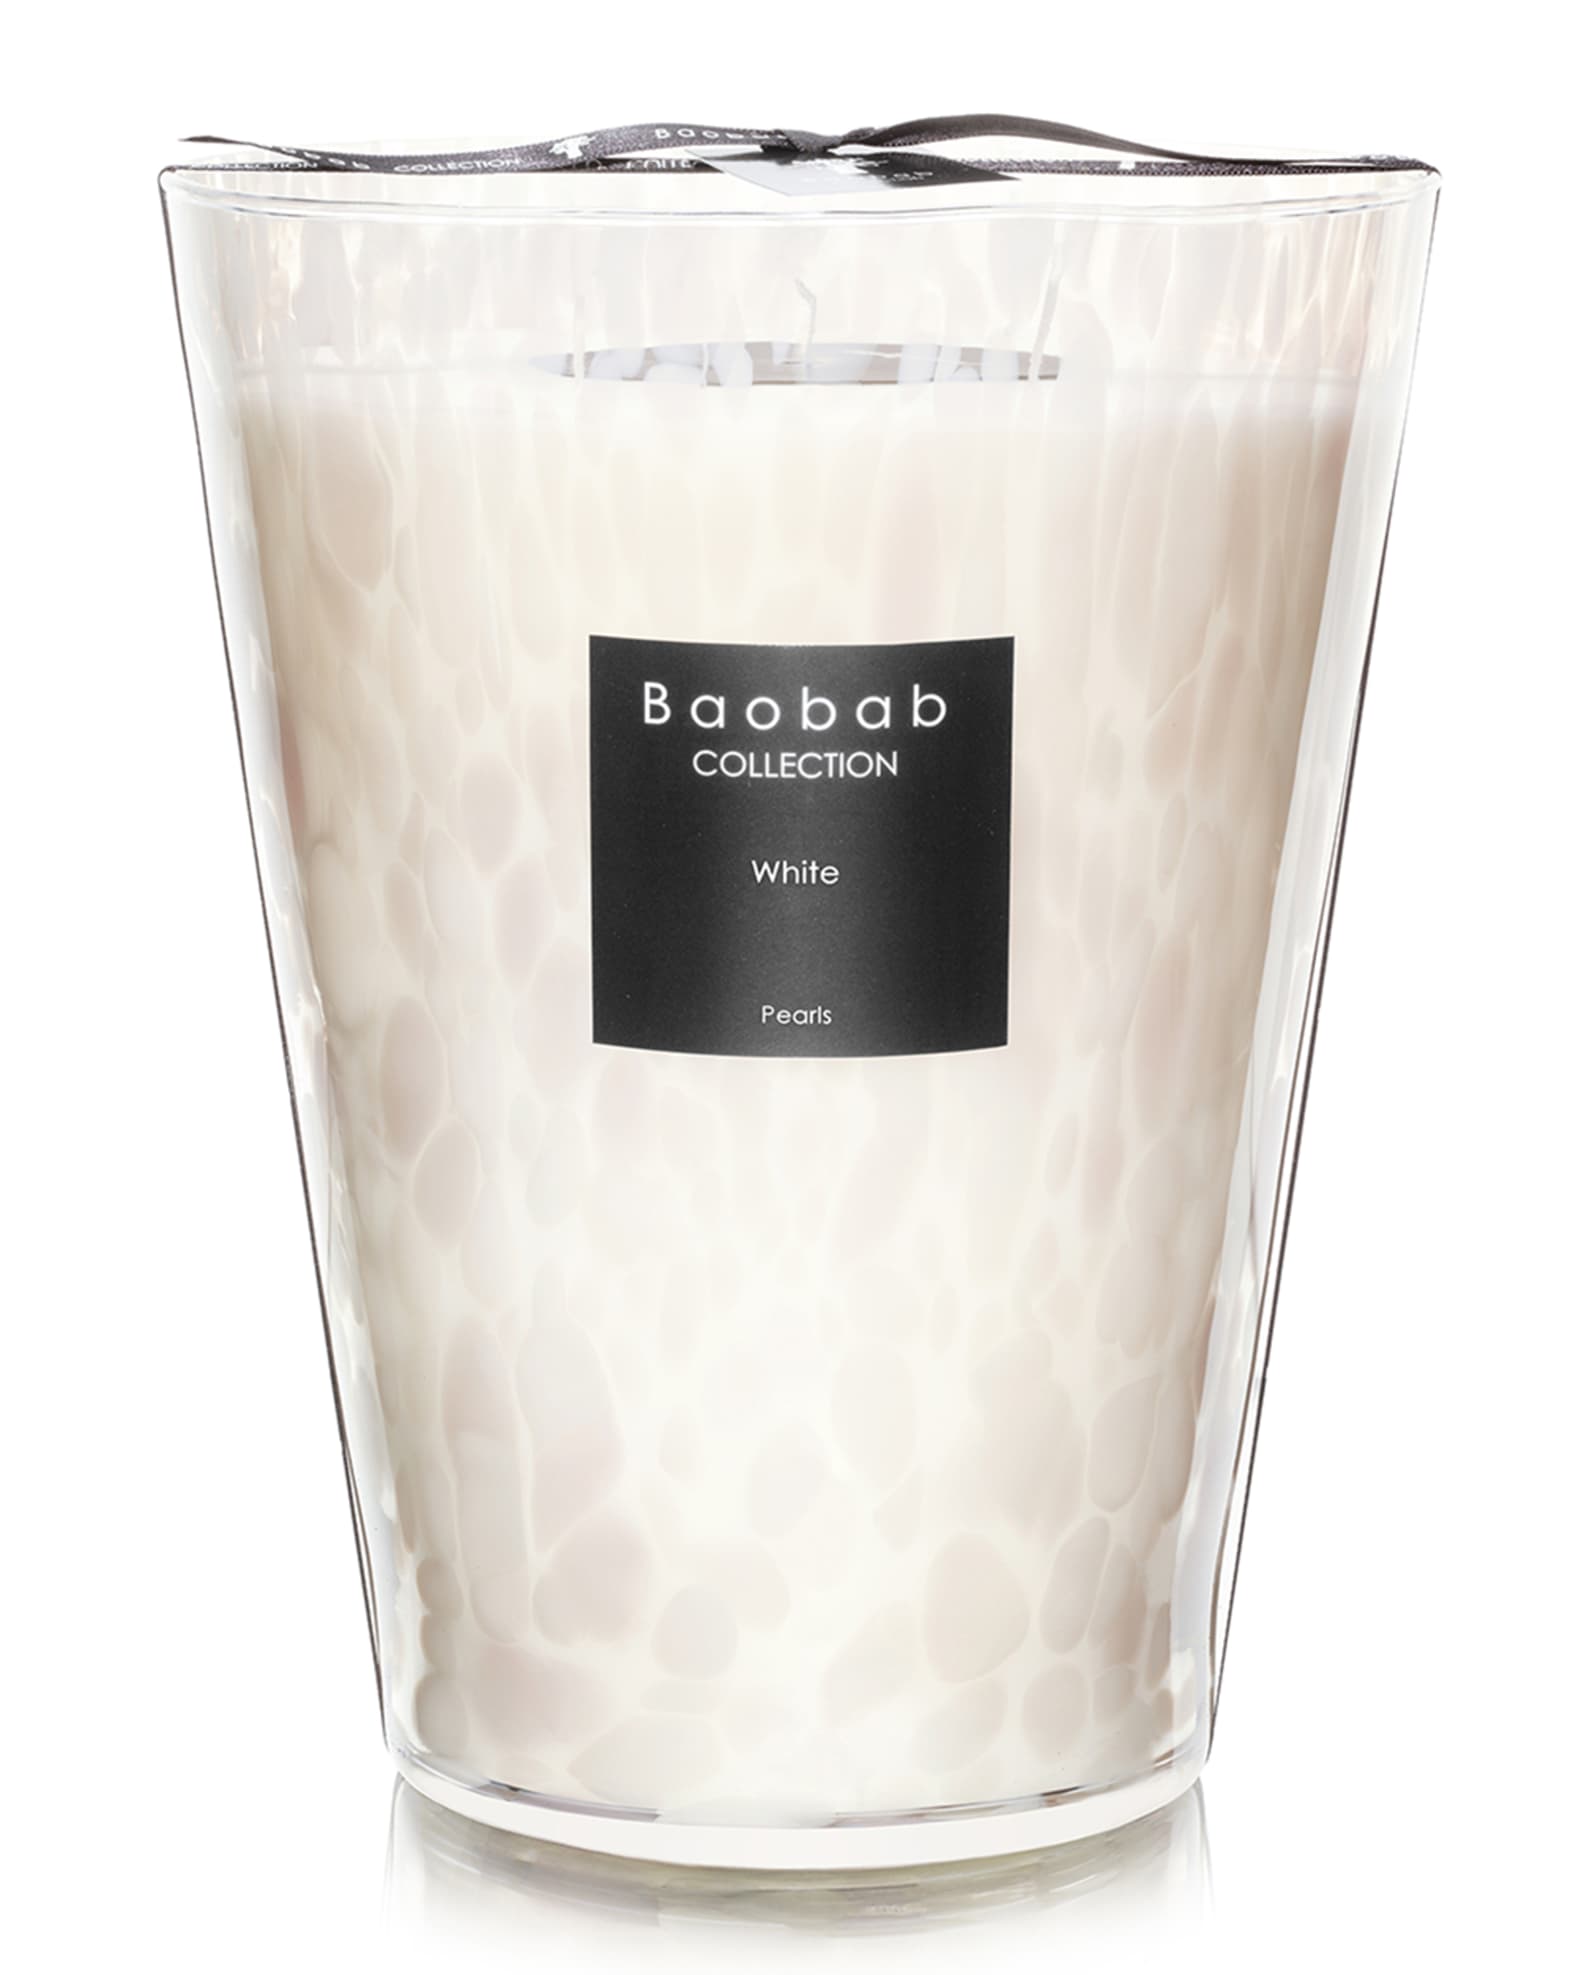 Baobab Collection White Pearls Candle, 9.4